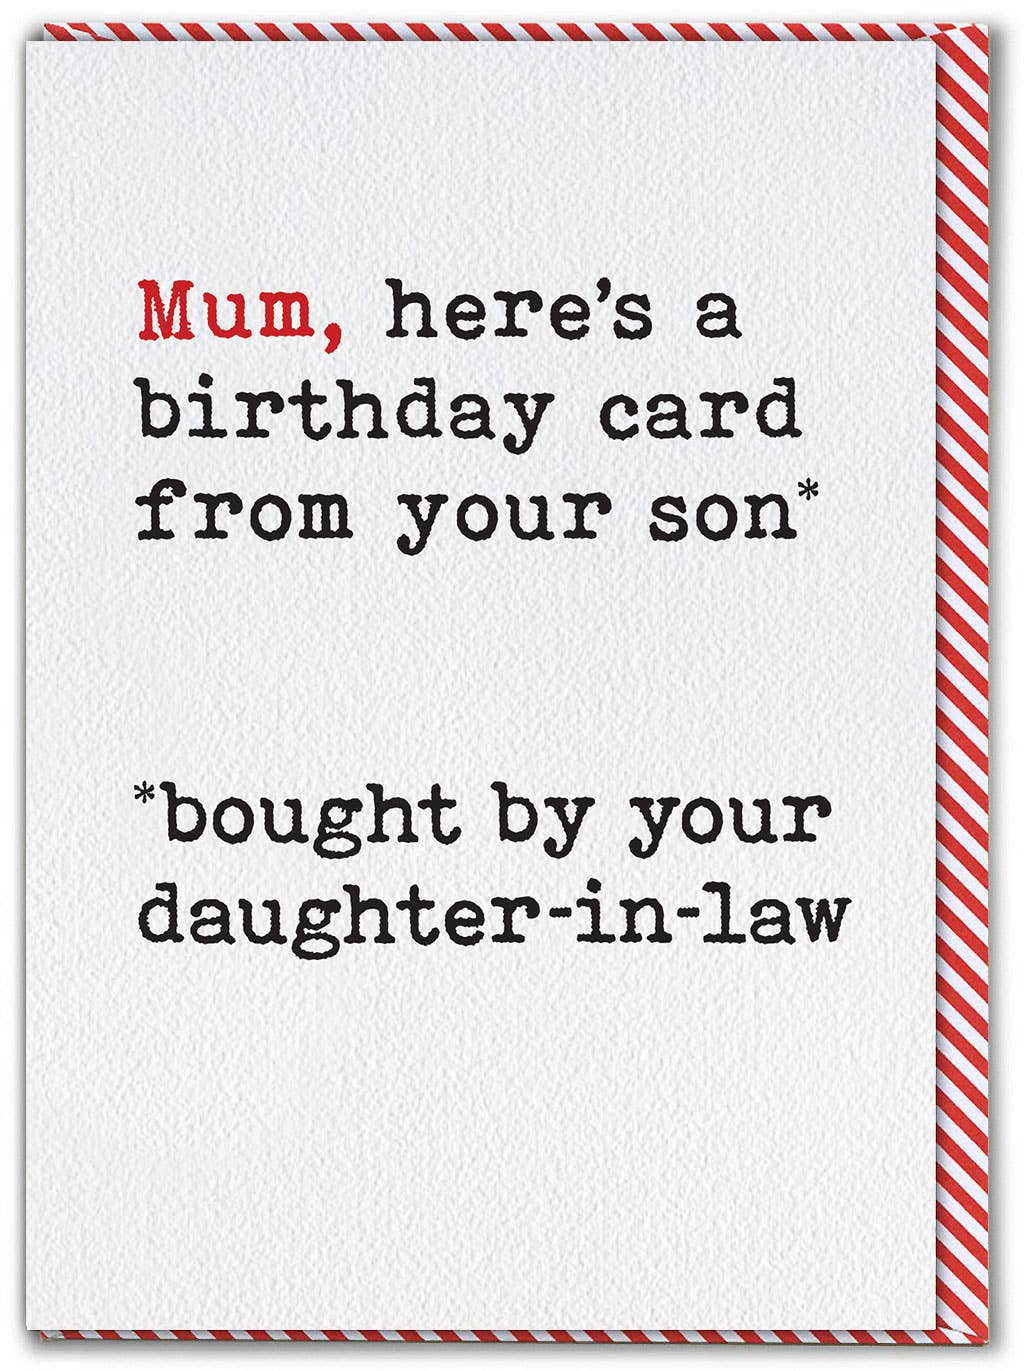 Mum Birthday Card- Bought By Daughter In Law